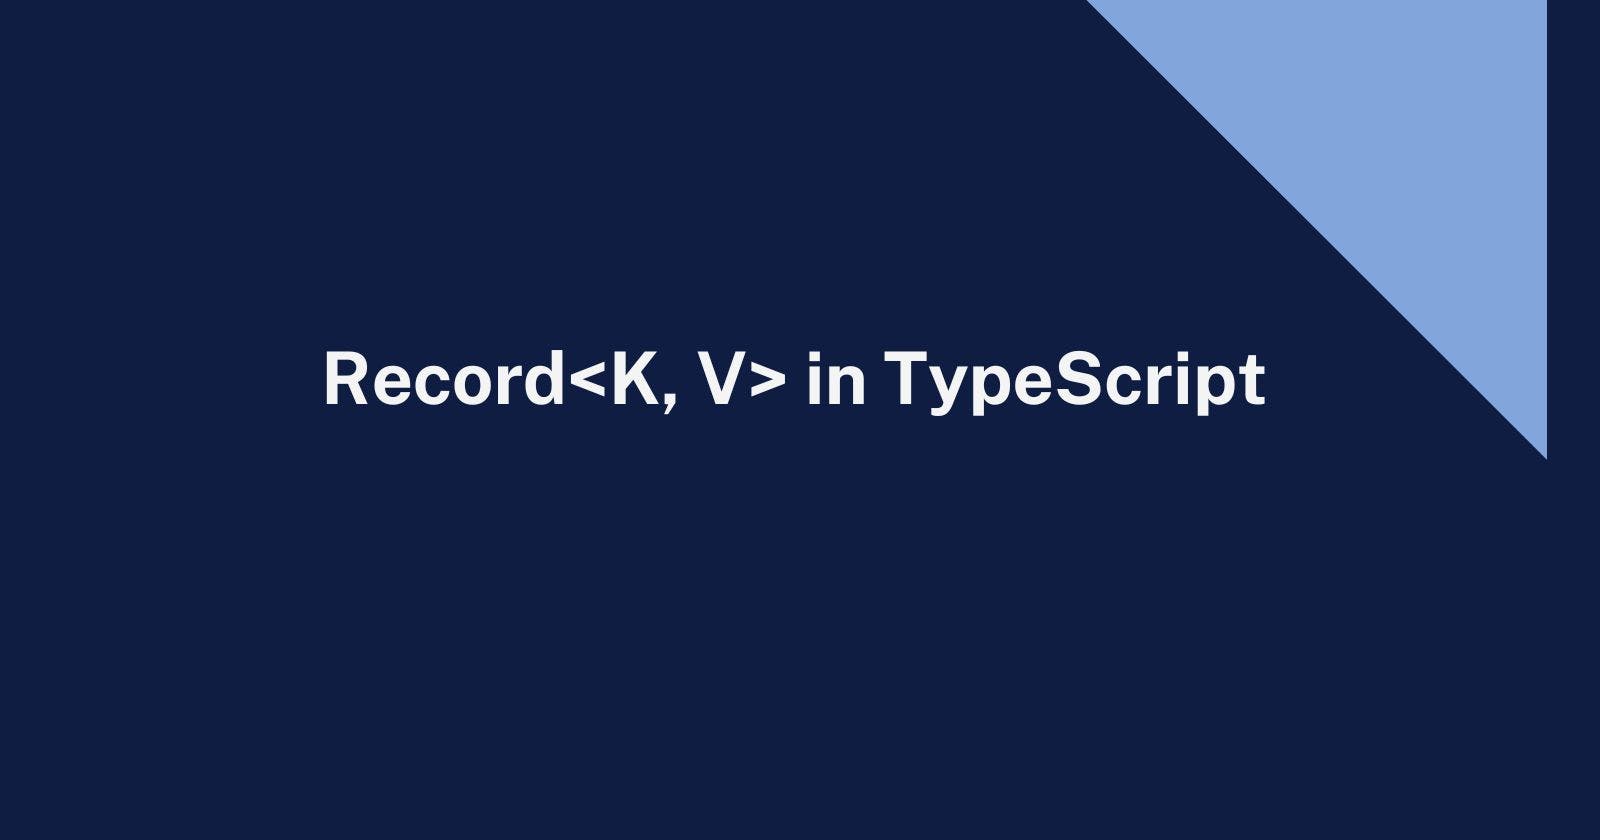 Cover Image for Exploring the power of Record<K, V> in TypeScript